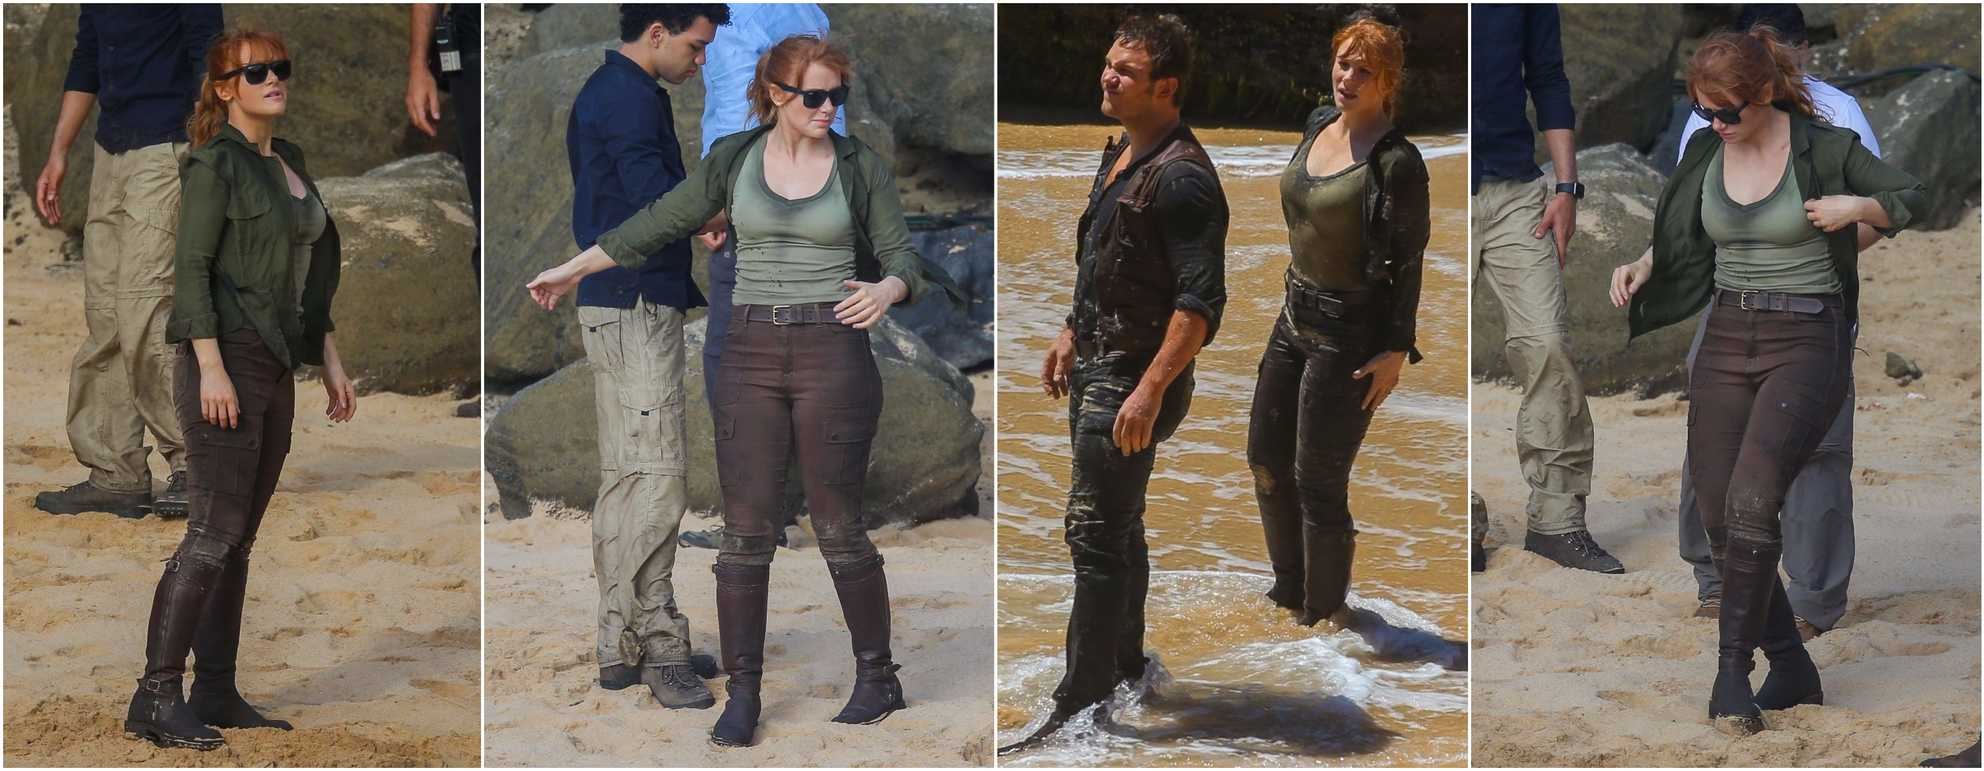 Updated: First look at Chris Pratt, Bryce Dallas Howard & Justice Smith in  costume from Jurassic World Fallen Kingdom! (Spoilers) | Jurassic Outpost